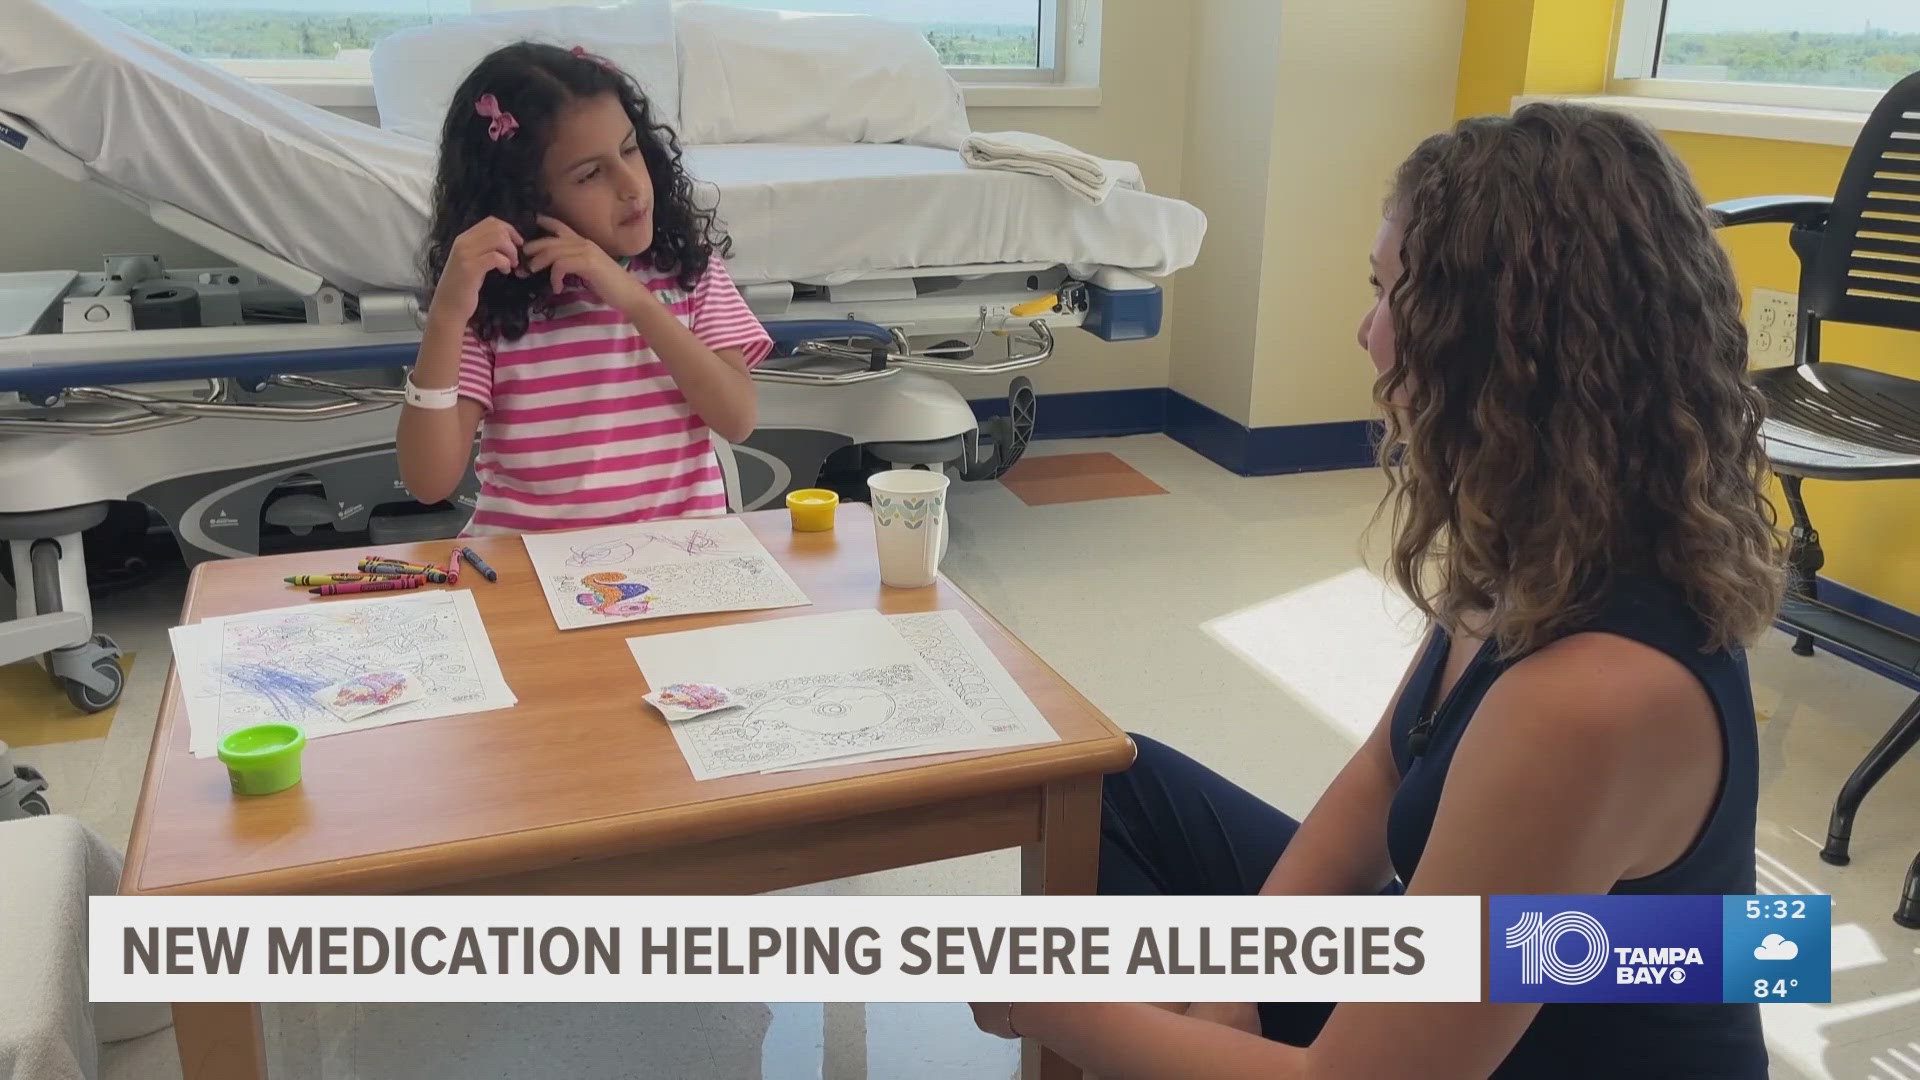 Layan Alabsi, 8, has a severe dairy allergy. Any kind of exposure has the potential to send her into anaphylactic shock.